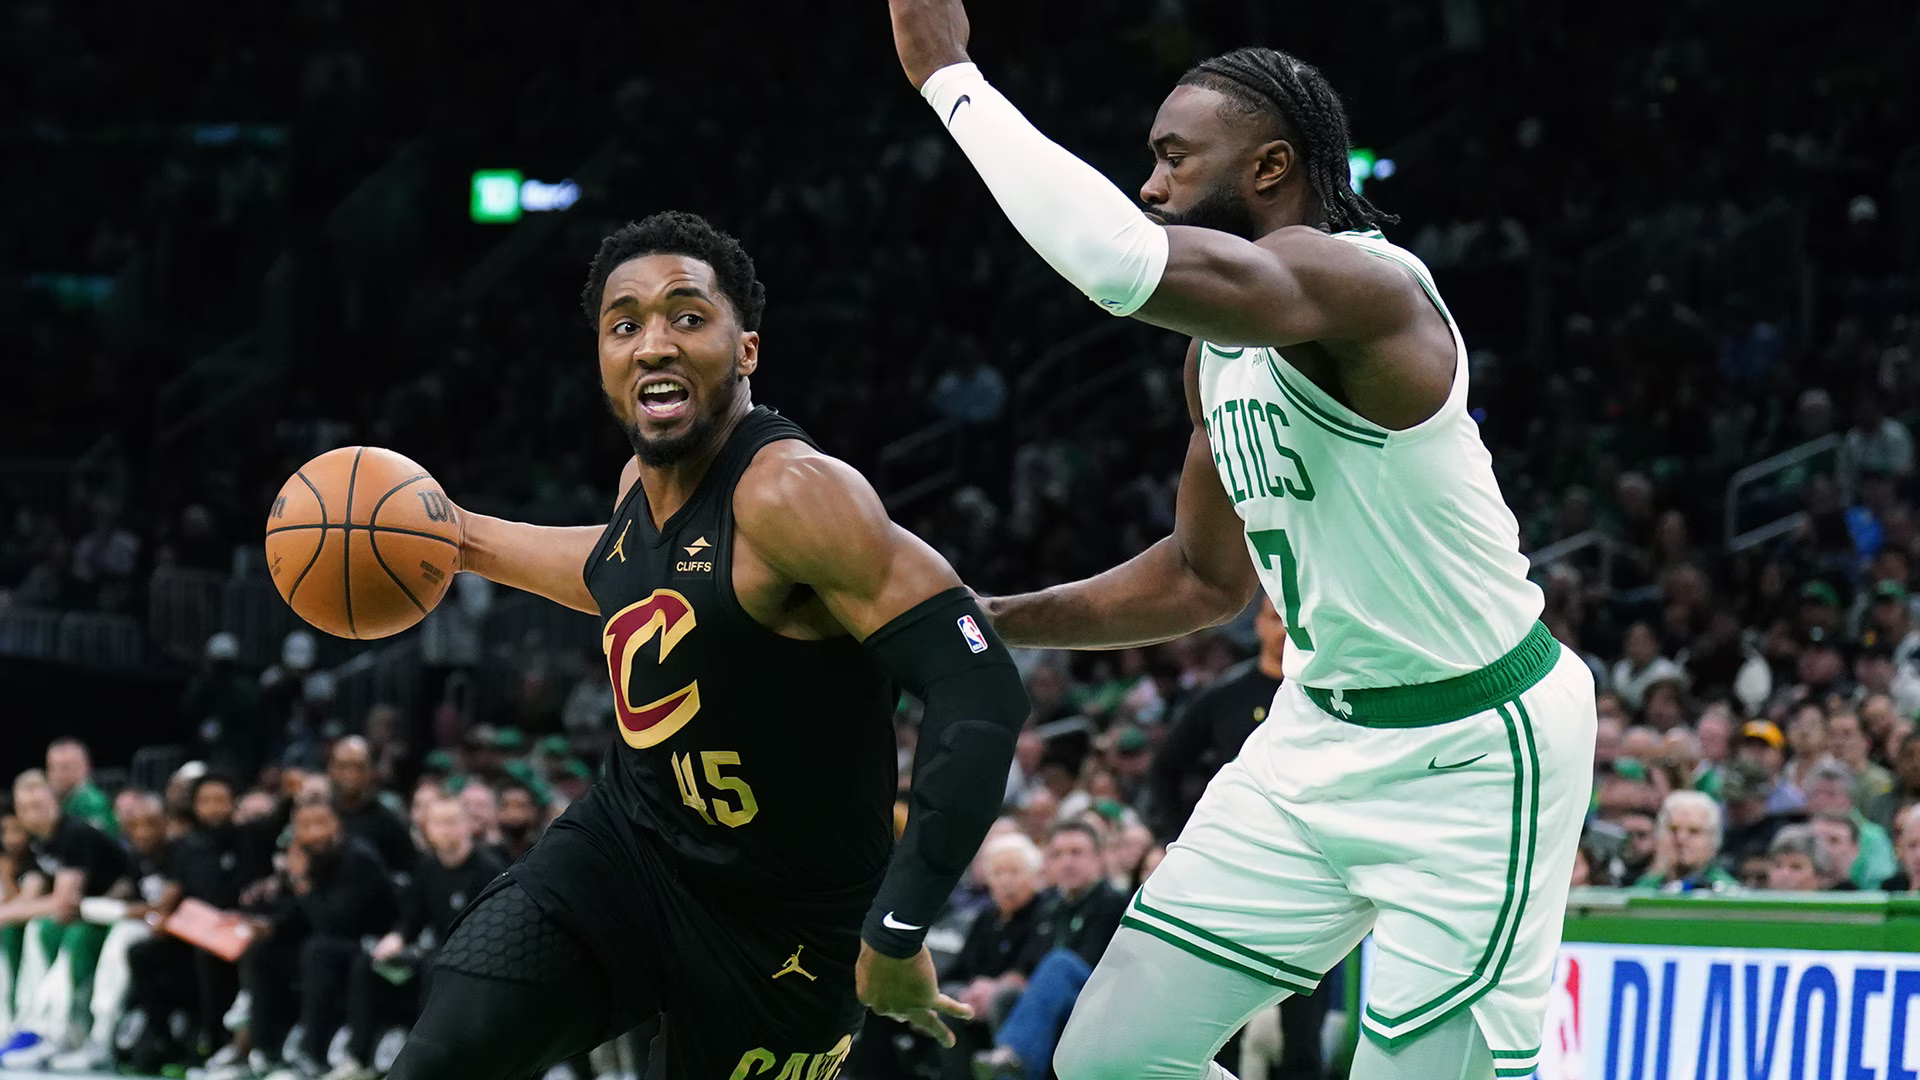 Celtics-Cavaliers: 4 things to look for in Game 3